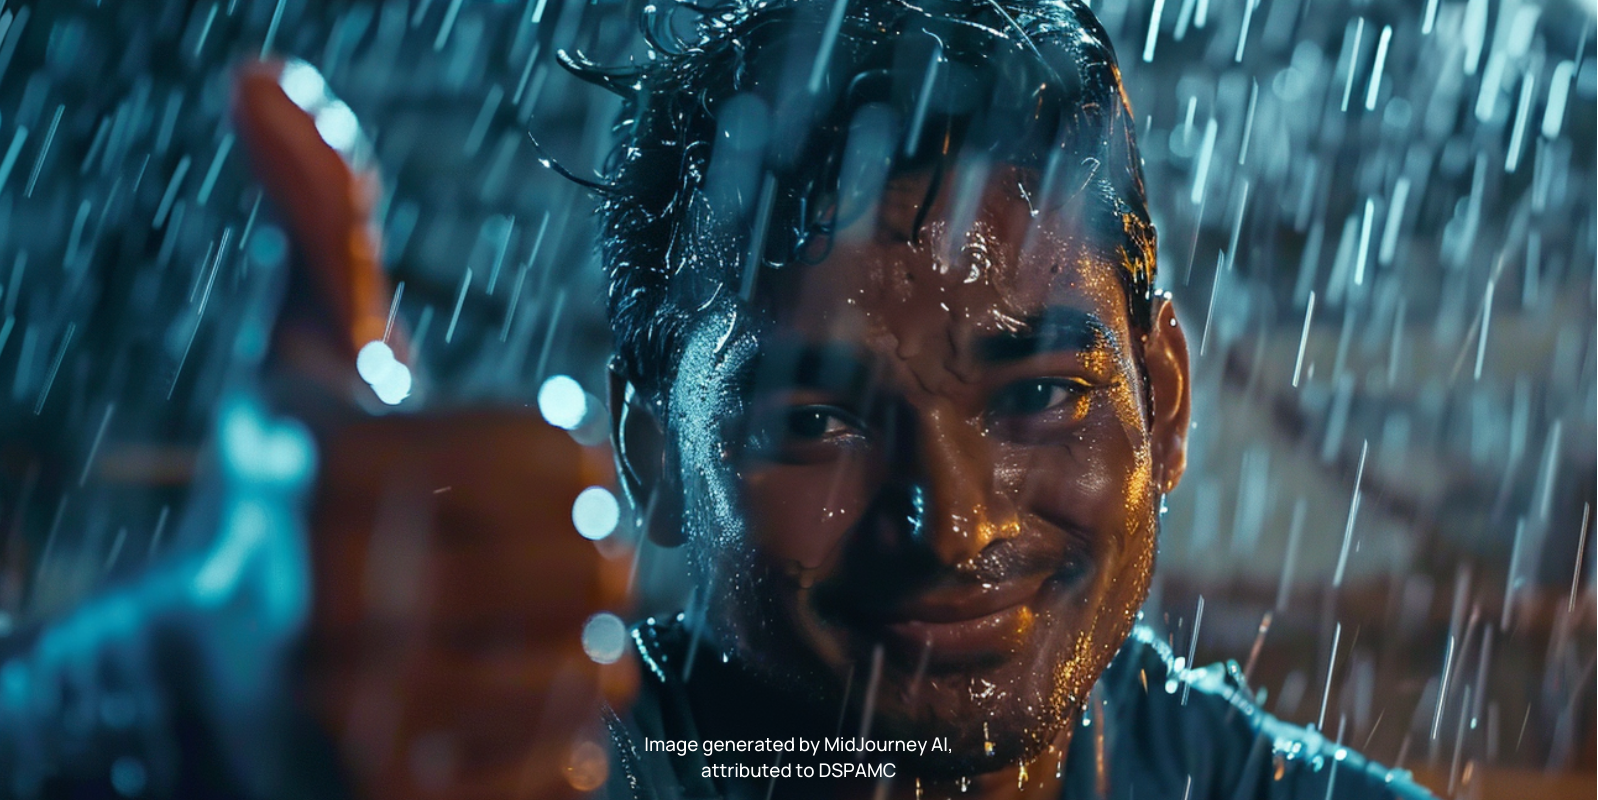 Smiling person in rainstorm